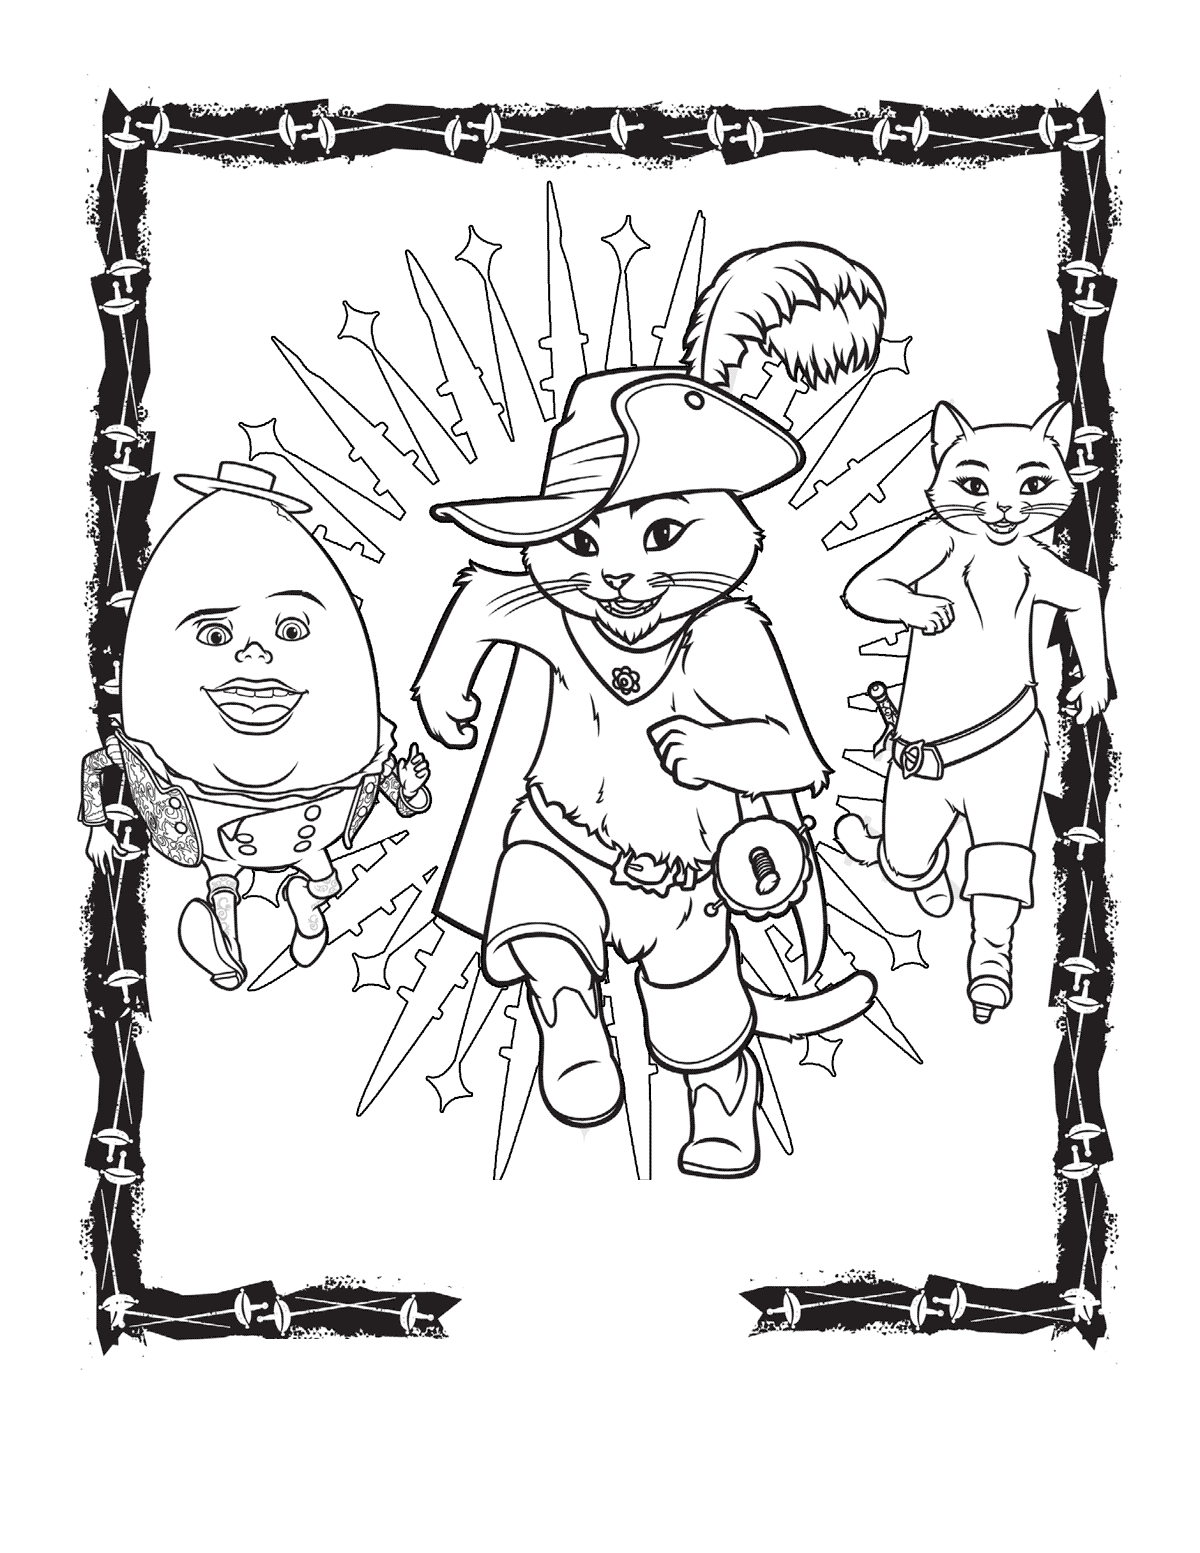 Download Coloring page - Adventures of Puss in Boots